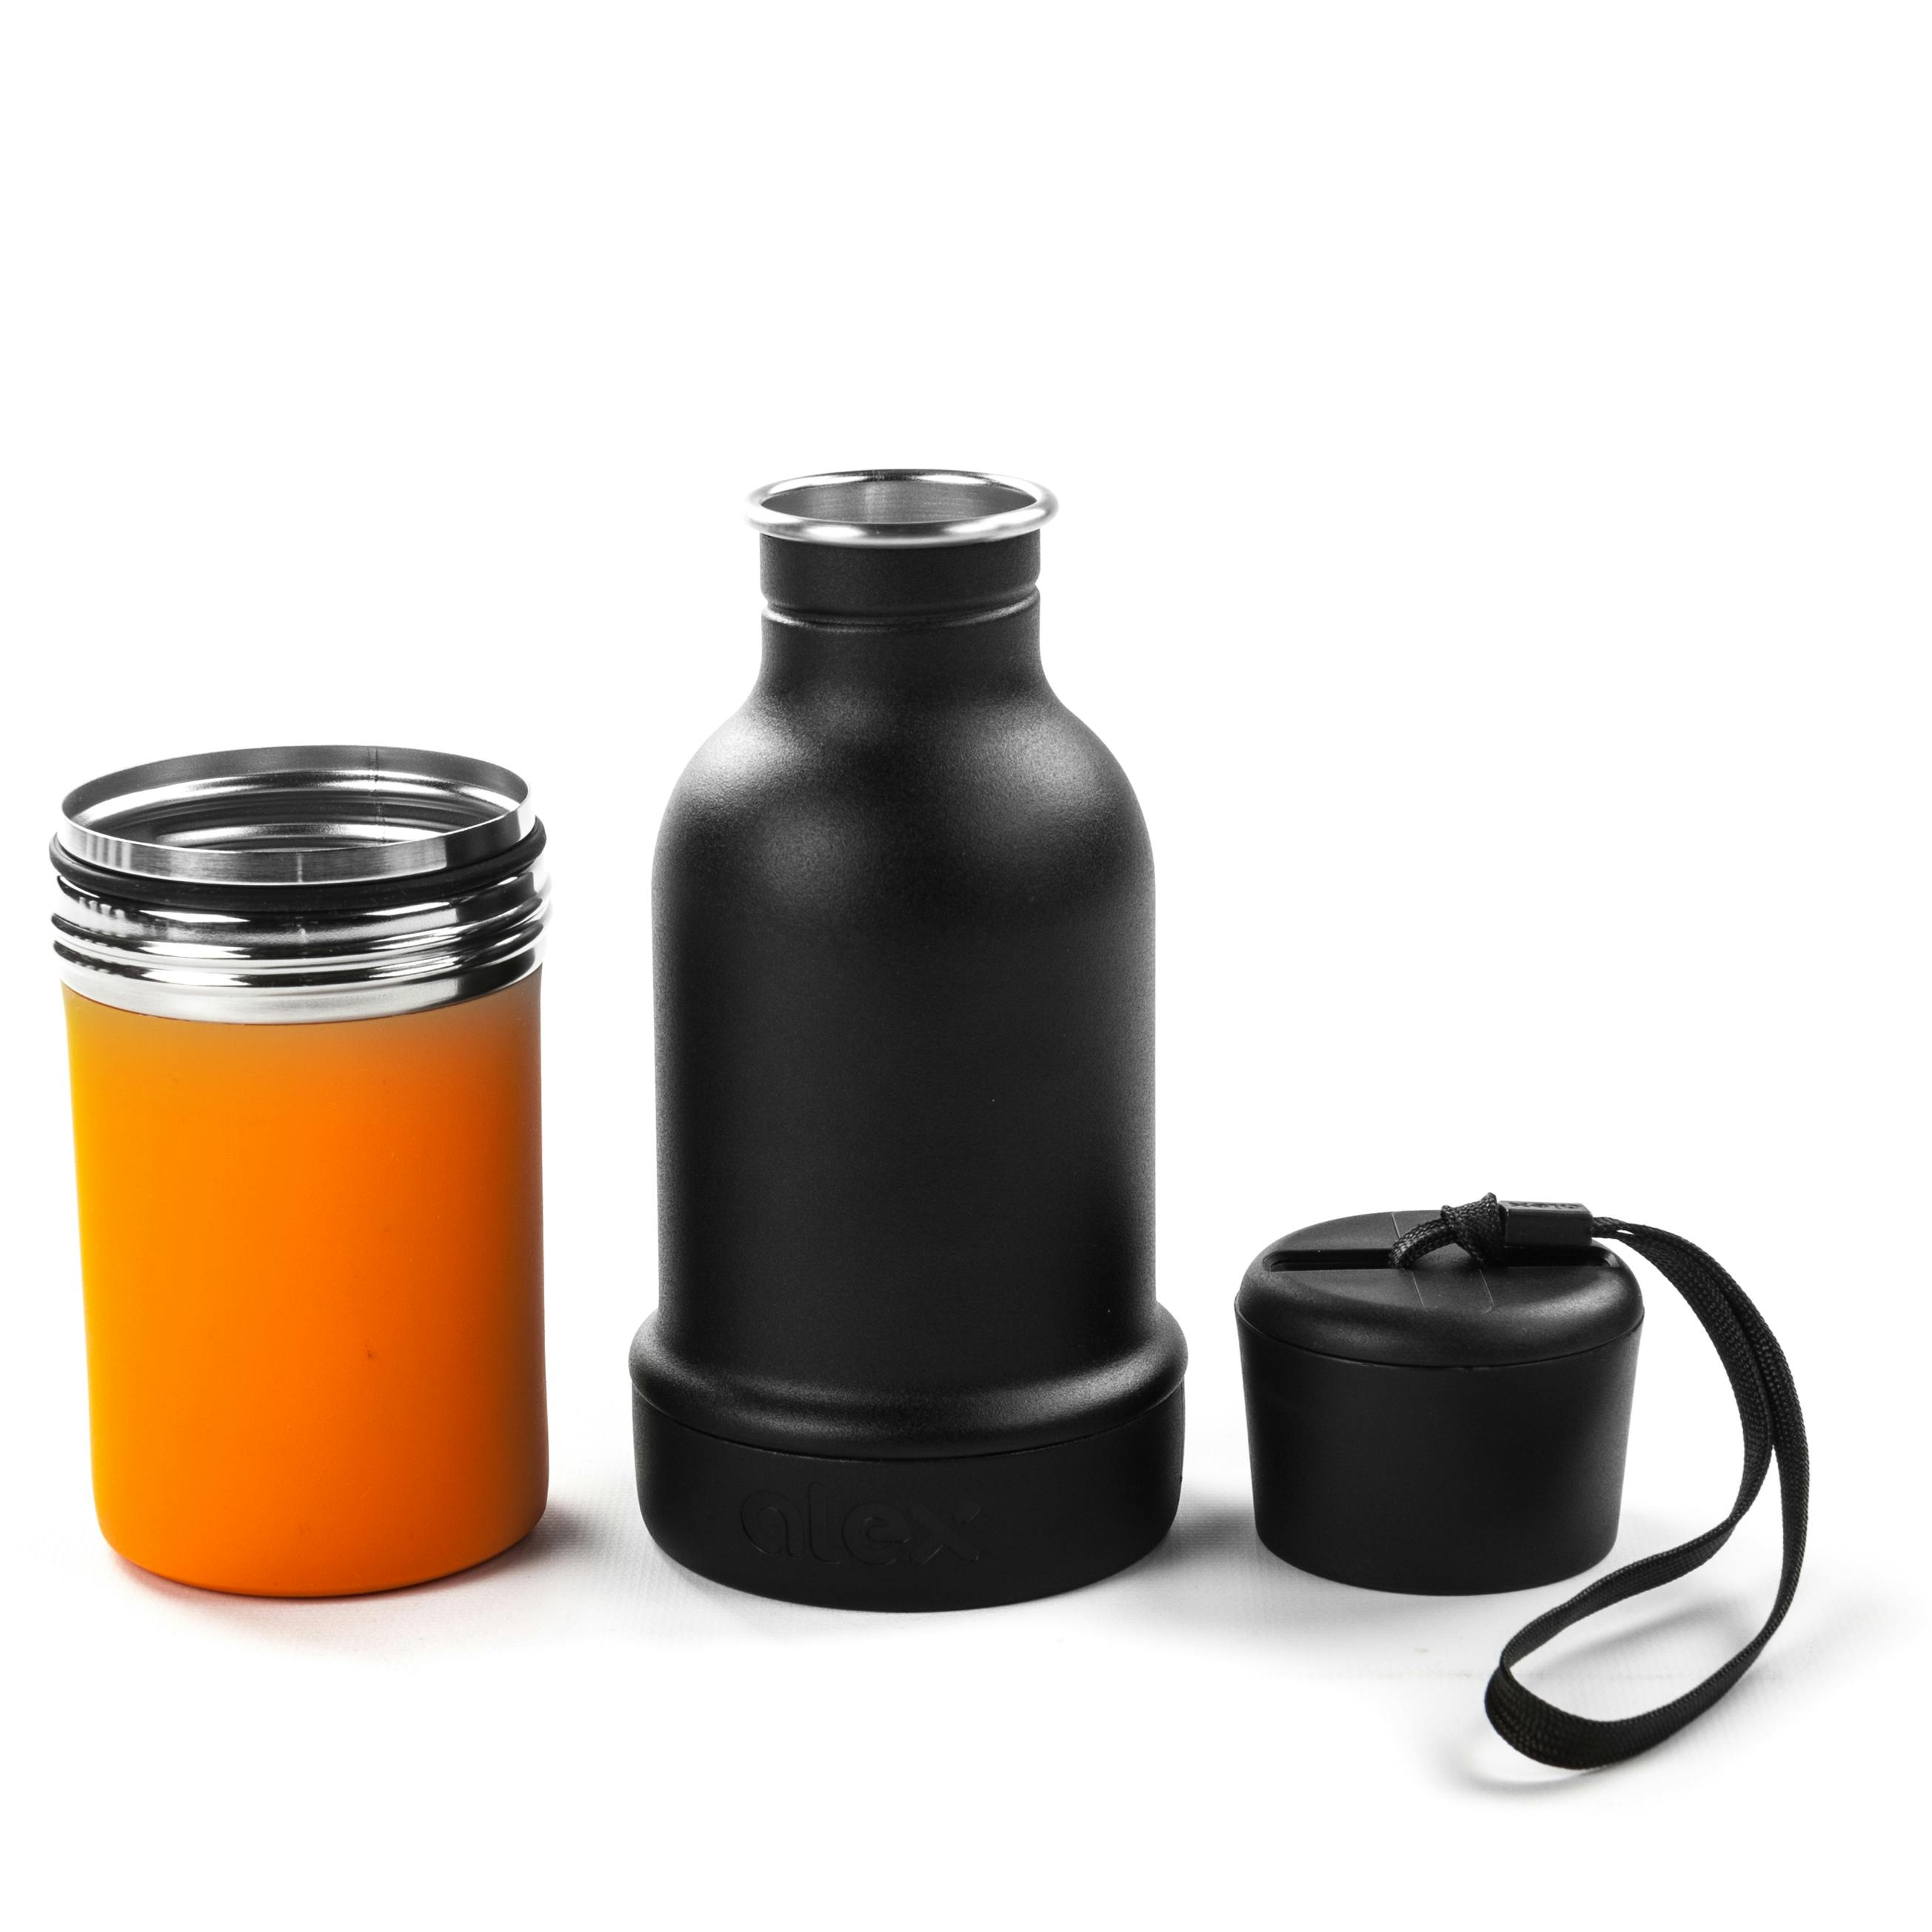 Wanted: Alex, an Easy to Clean, Reusable Water Bottle